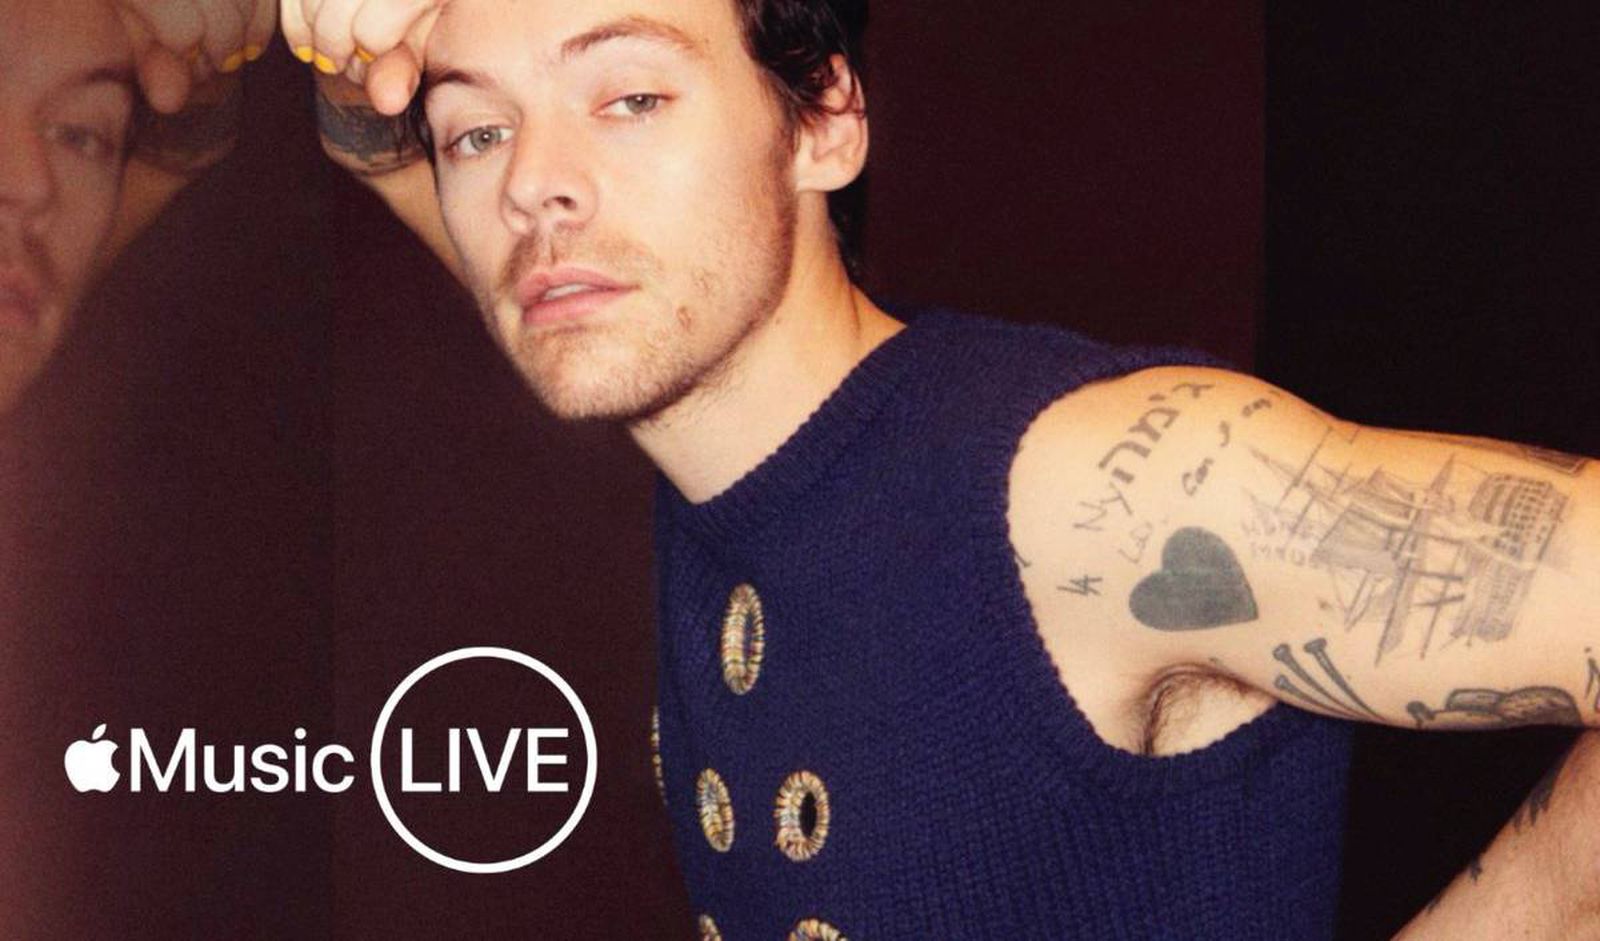 macrumors.com - Joe Rossignol - Apple Music to Livestream Select Concerts, Starting With Harry Styles This Friday